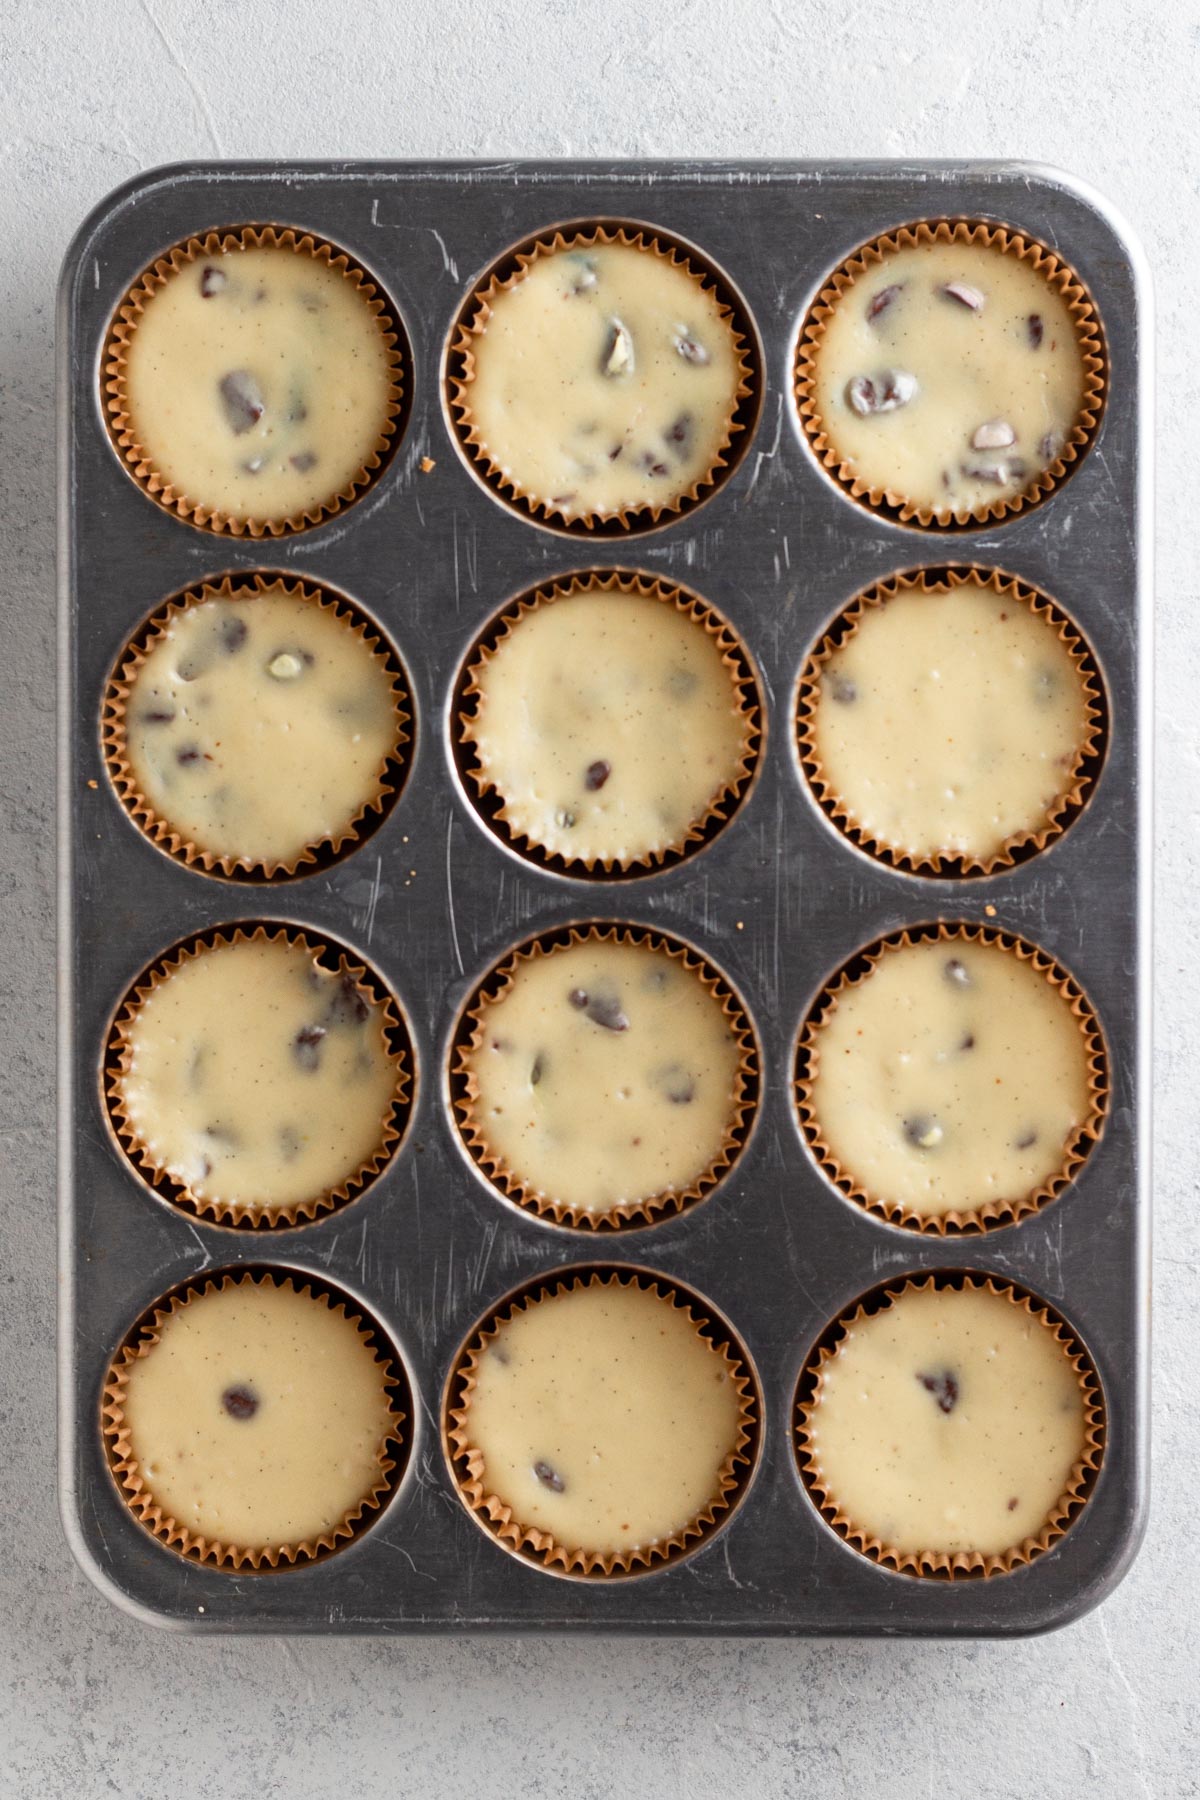 Baked mini cheesecakes in a muffin pan.